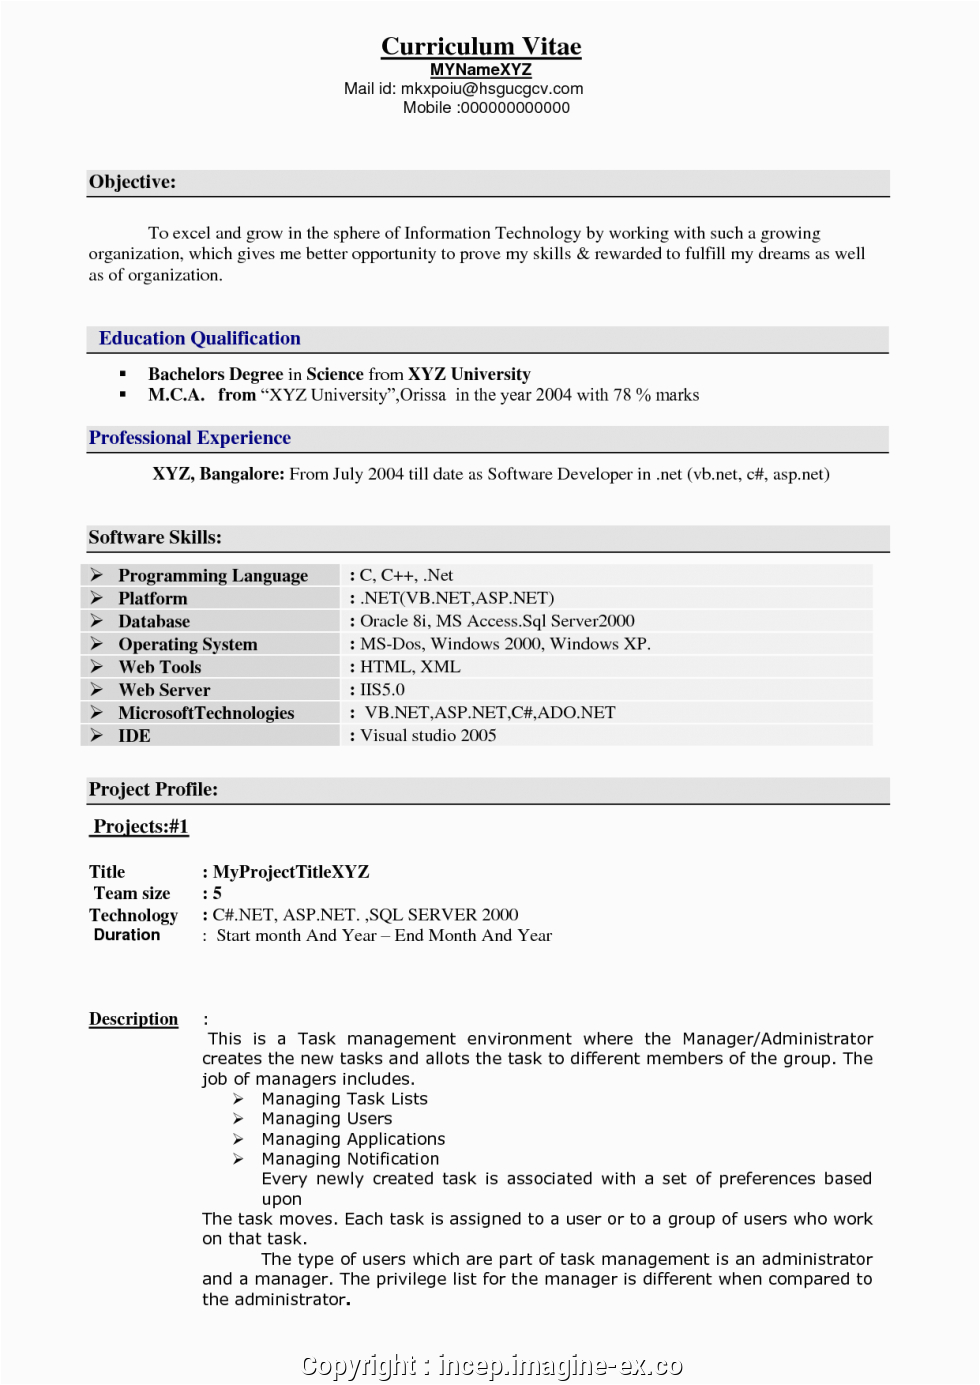 Sample Resume format for Experienced Professionals Professional Resume format for Experienced It Resume